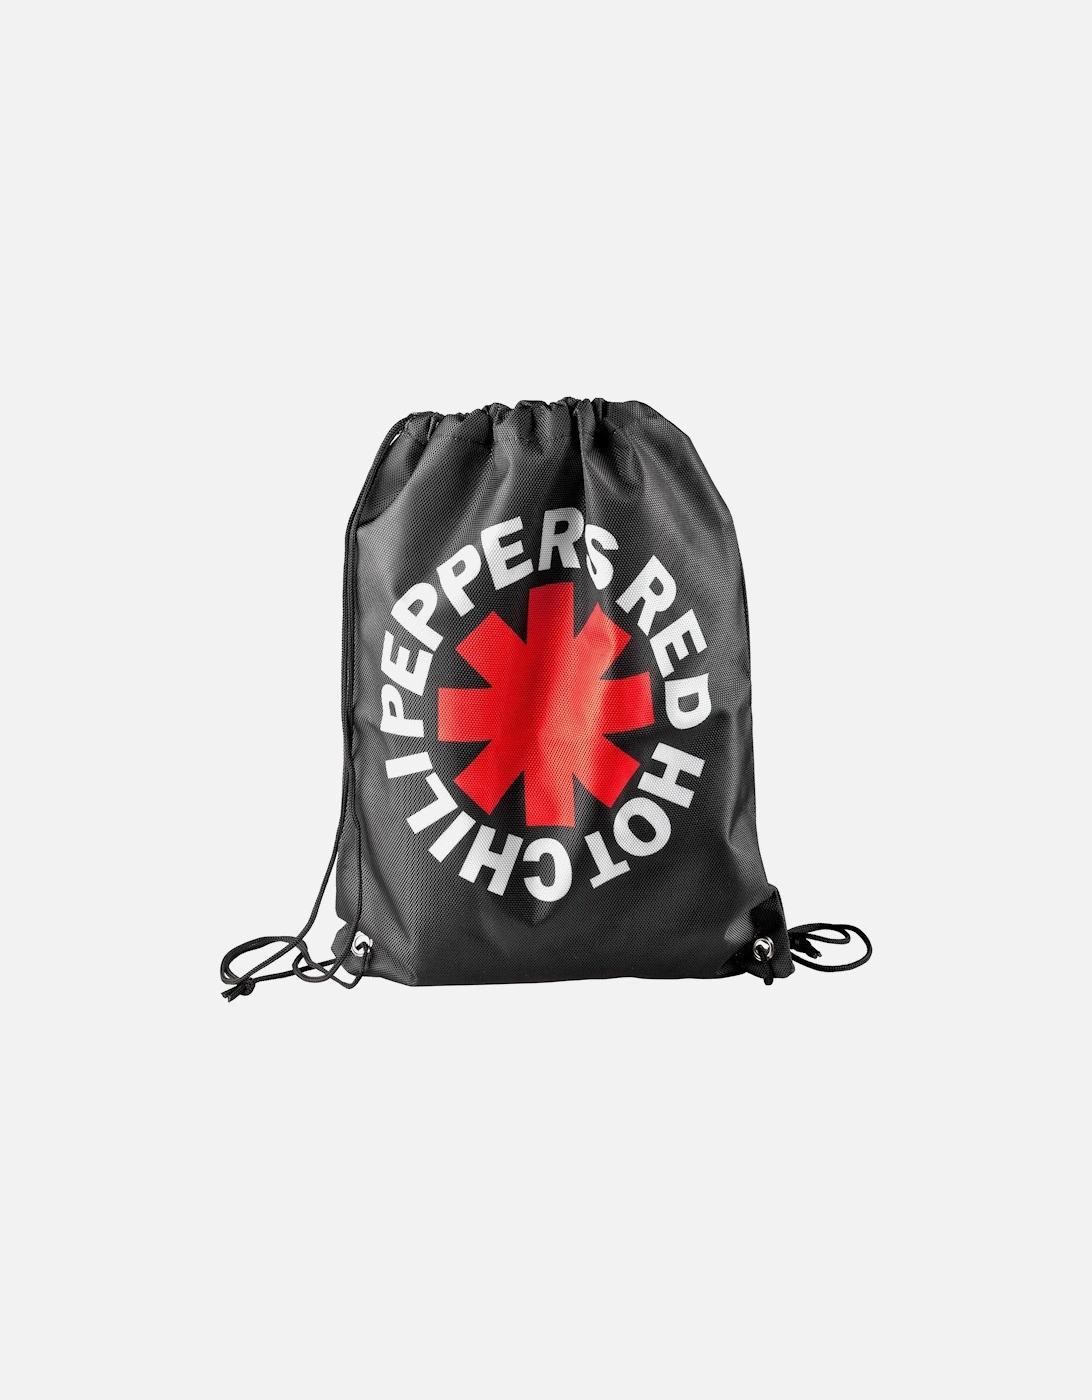 Asterix Red Hot Chili Peppers Drawstring Bag, 2 of 1